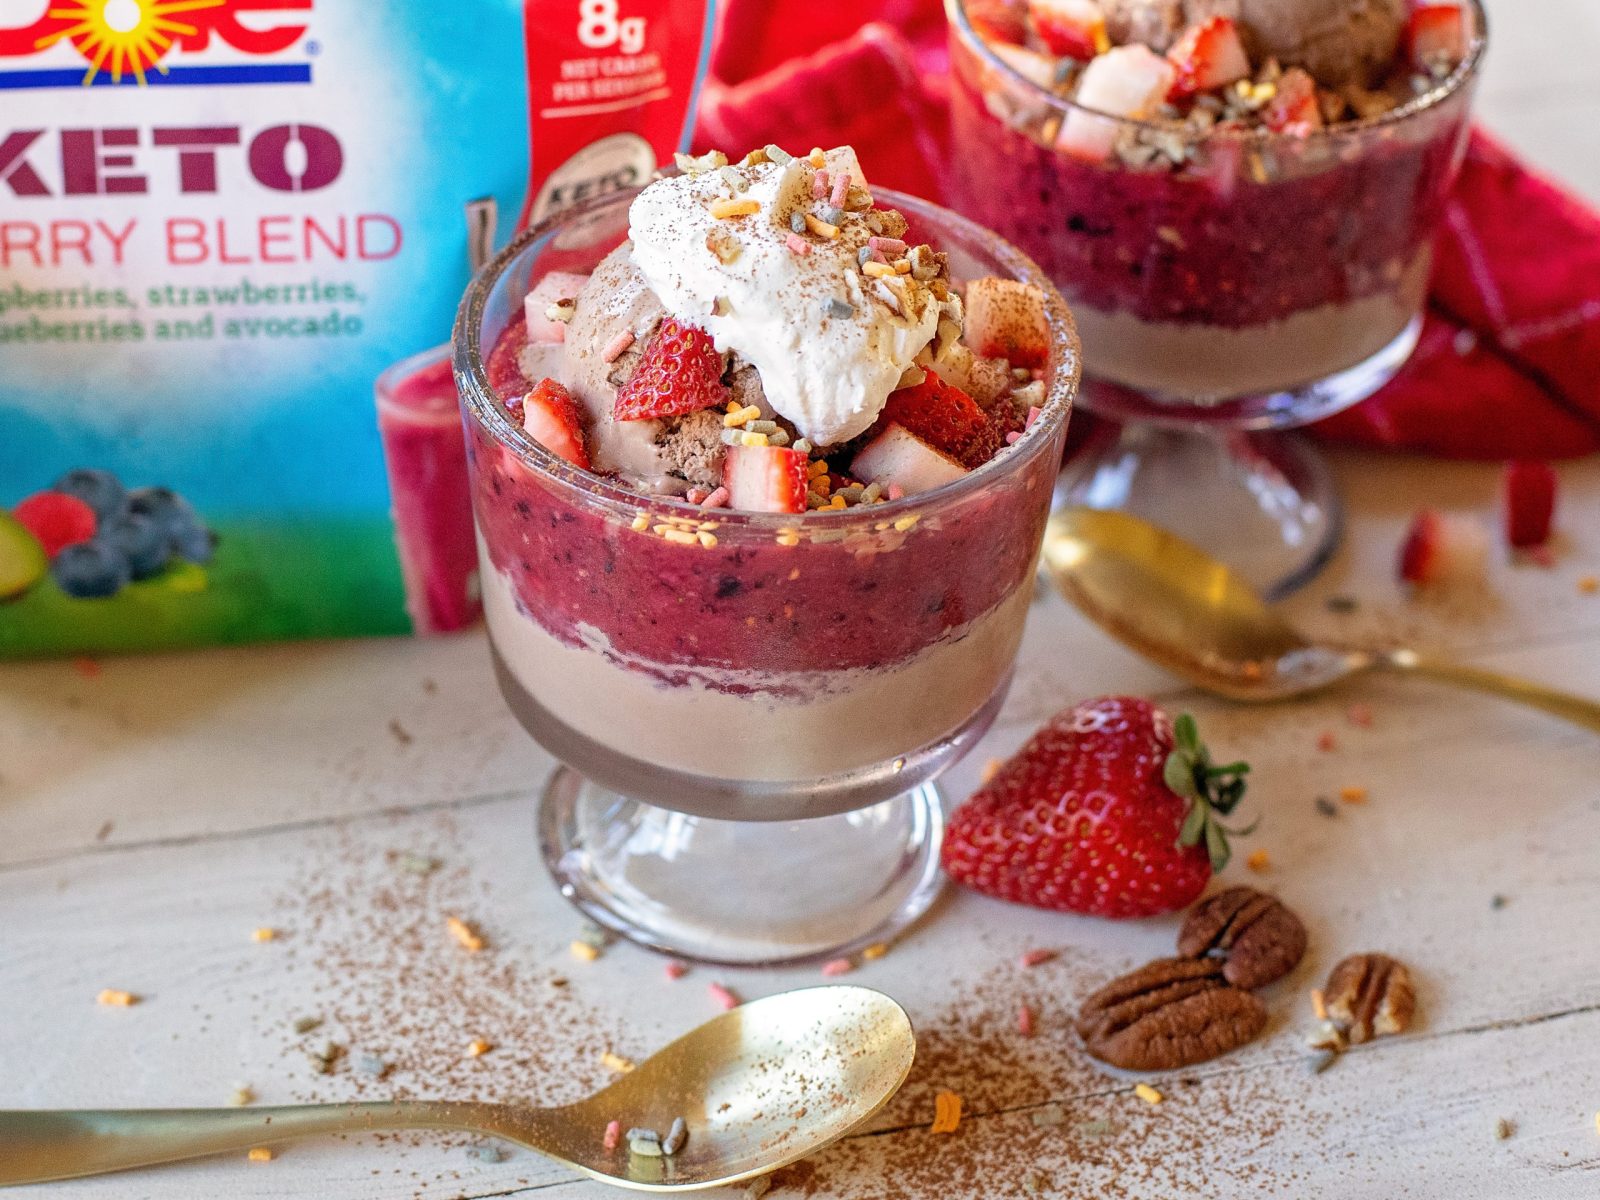 Save $2 On Dole® Keto Berry Blend & Halo Top® And Try My Very Berry Chocolate Cheesecake Sundae